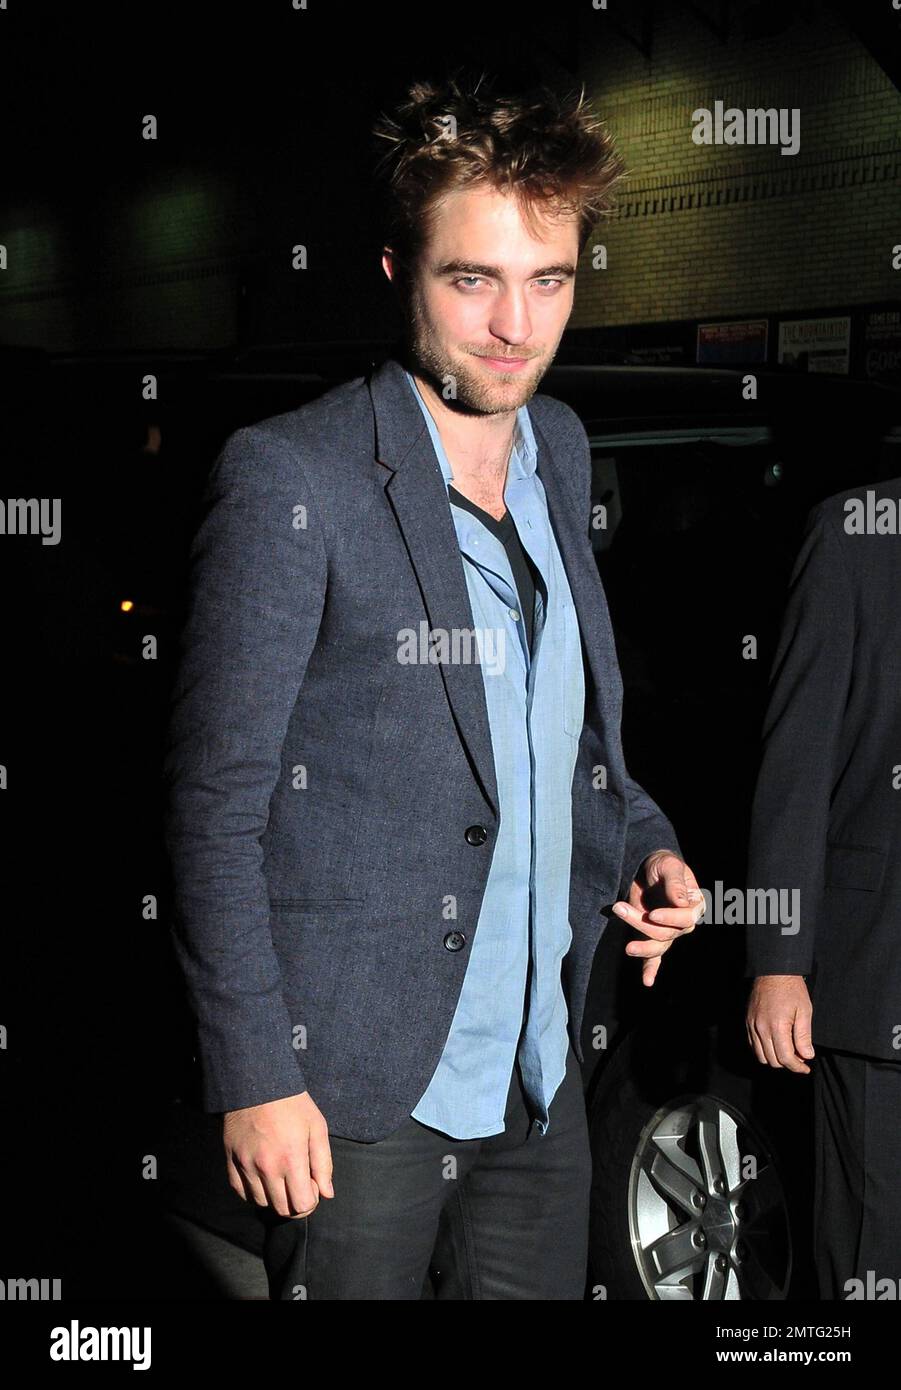 'Twilight Saga' star Robert Pattinson poses for photos outside the 'Late Show with David Letterman' studios. Pattinson, best known for his character Edward Cullen, is currently promoting the latest movie in the series 'Breaking Dawn Part 1' due in theaters on November 18. New York, NY. 8th November 2011. Stock Photo